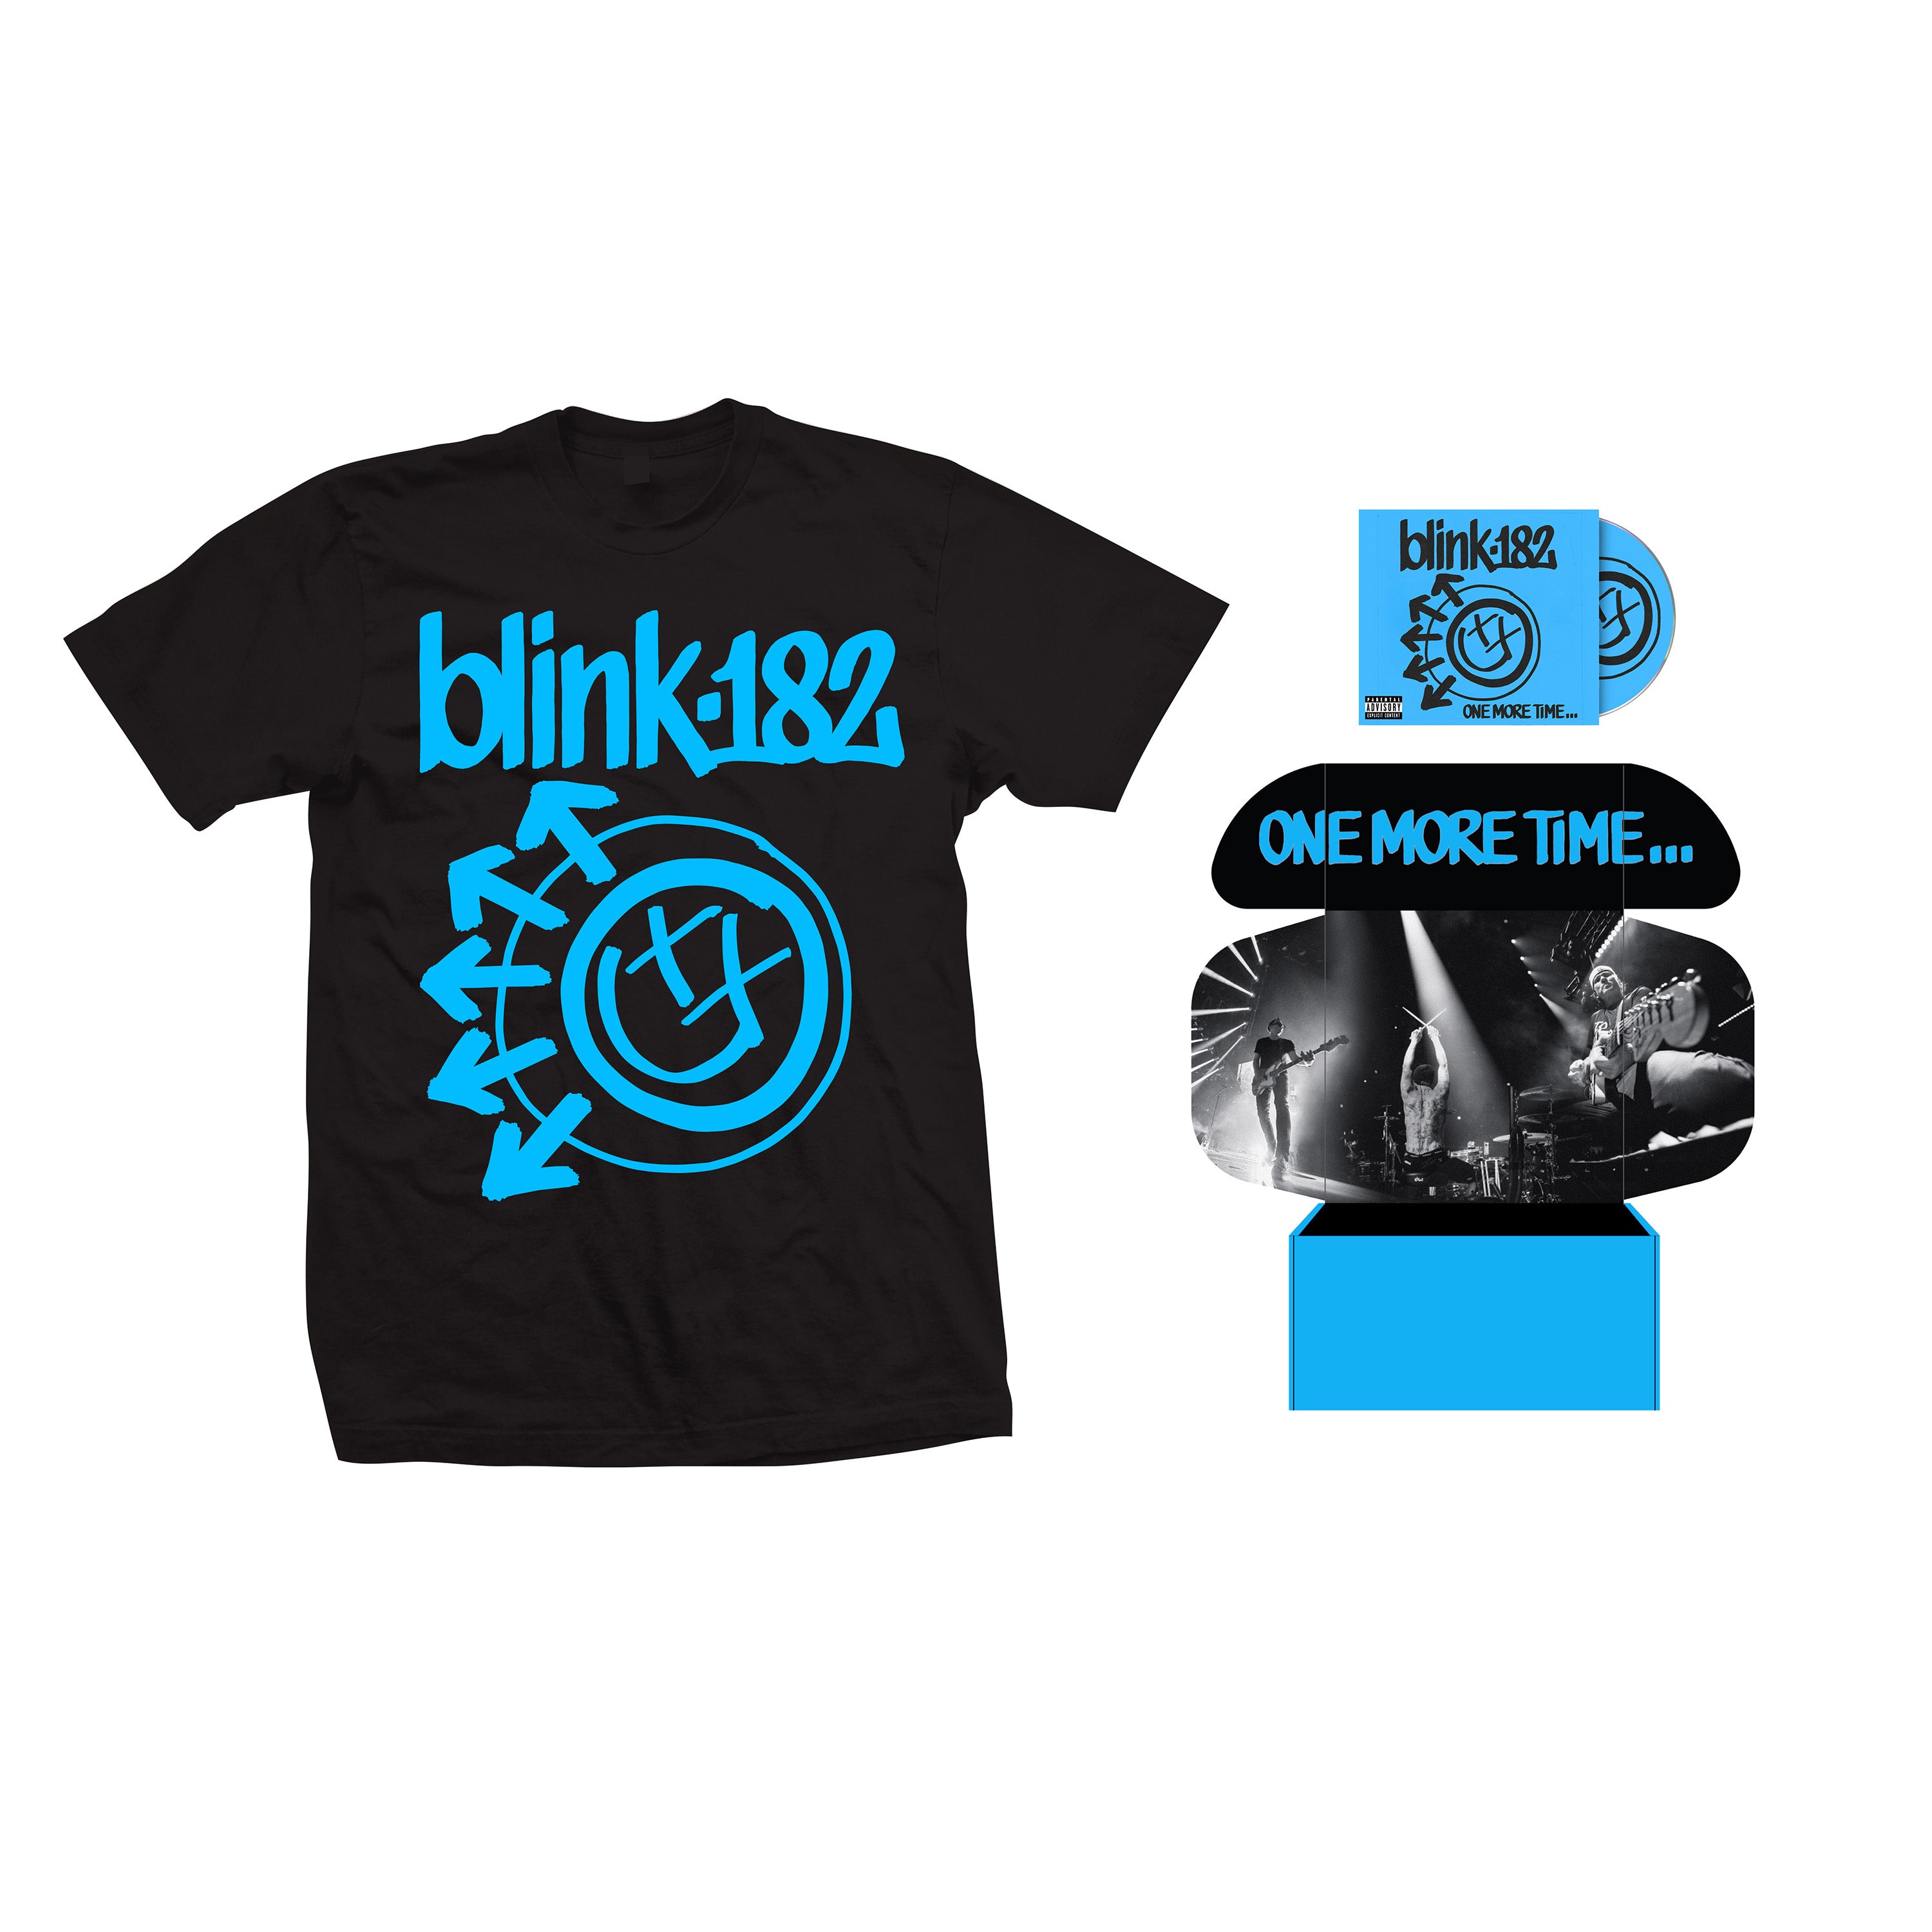 Blink-182–OneMoBlink-182 – One More Time... 限定BOX シャツ付き